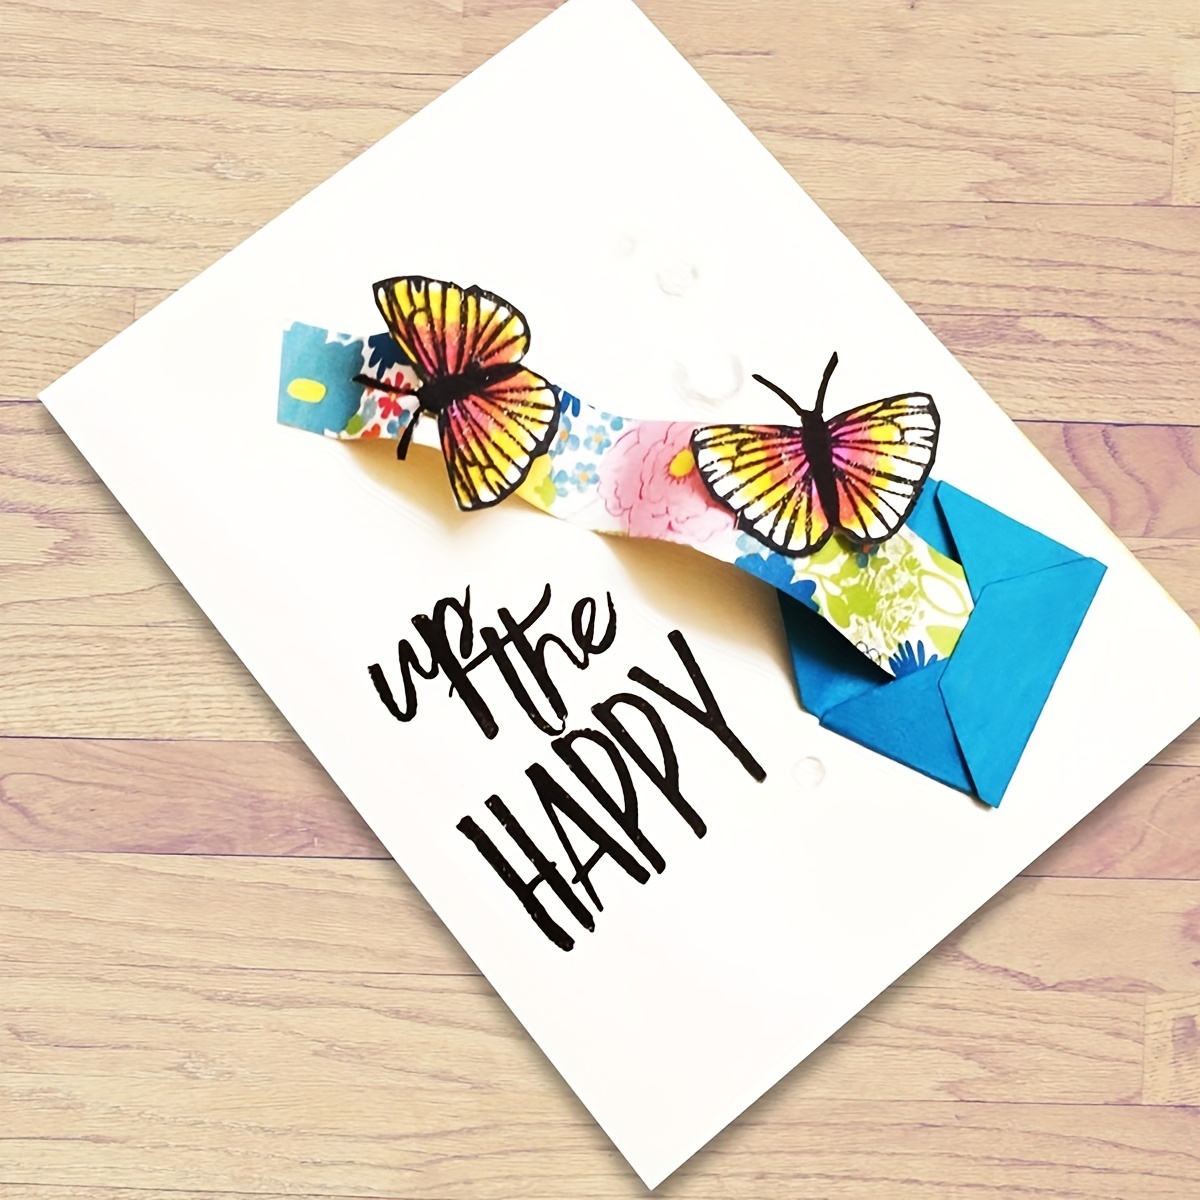 How to Make a Greeting Paper Card, DIY Paper Crafts